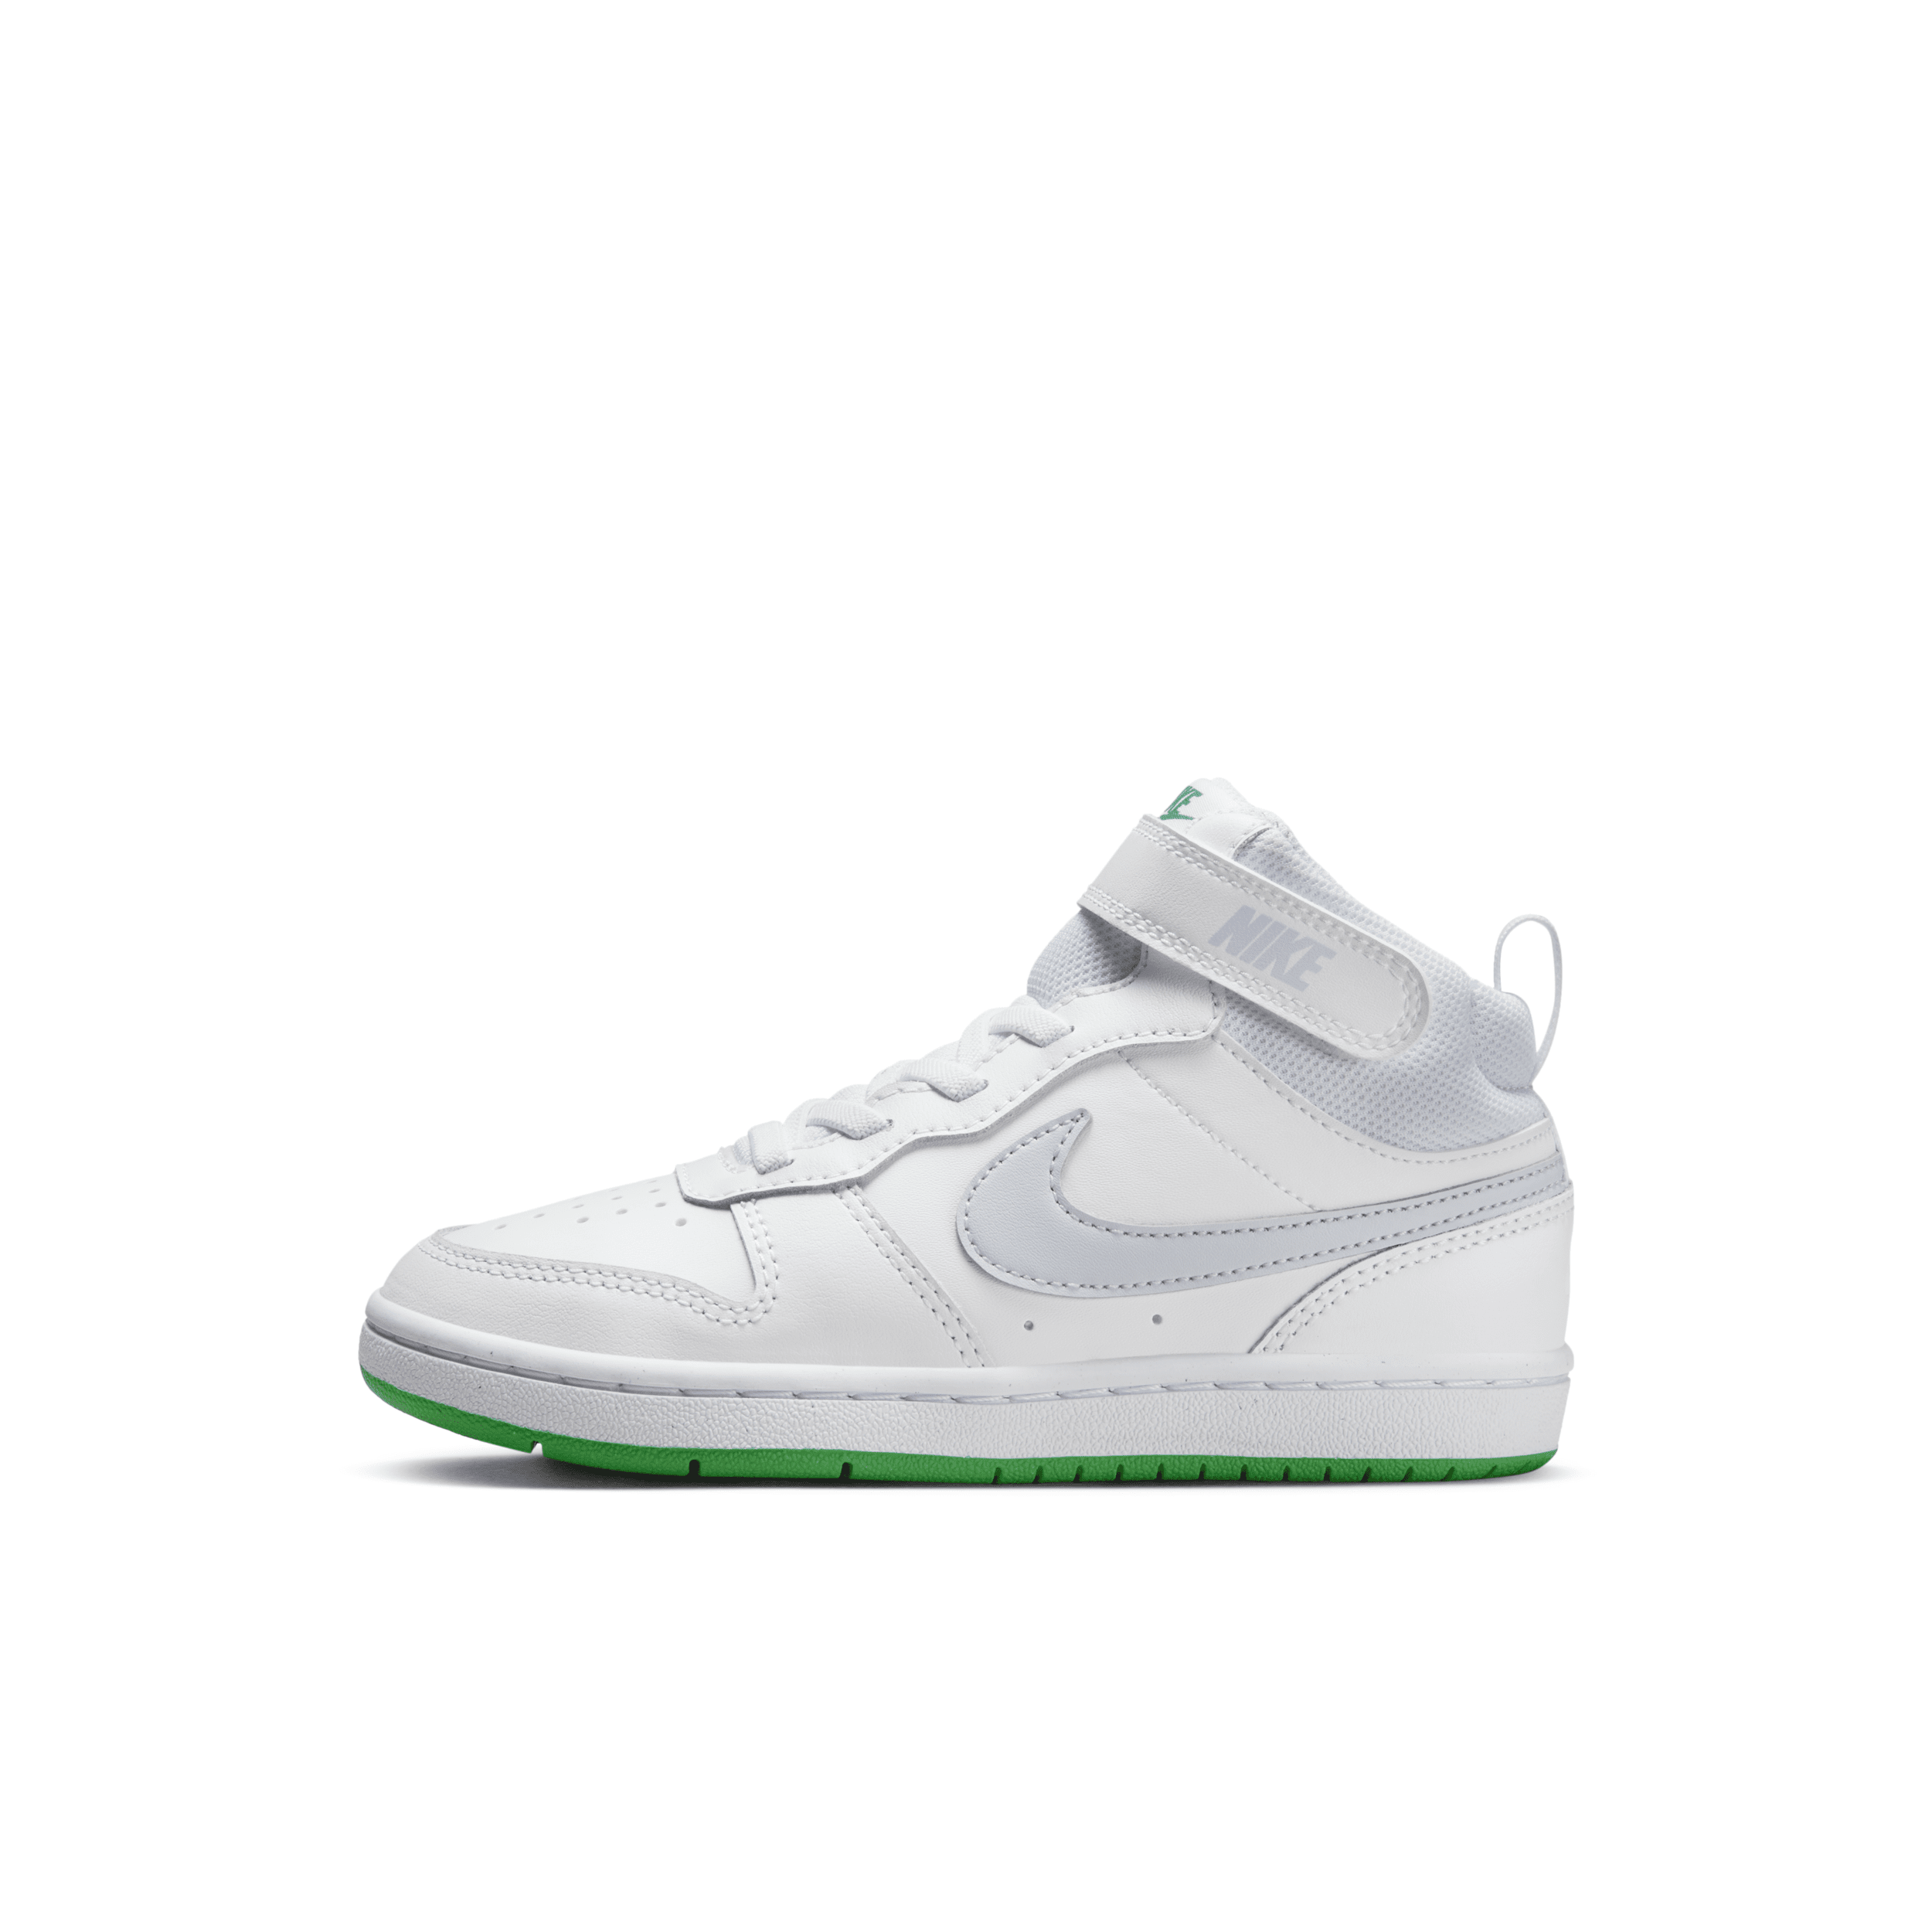 Nike Court Borough Mid 2 Little Kids' Shoes In White